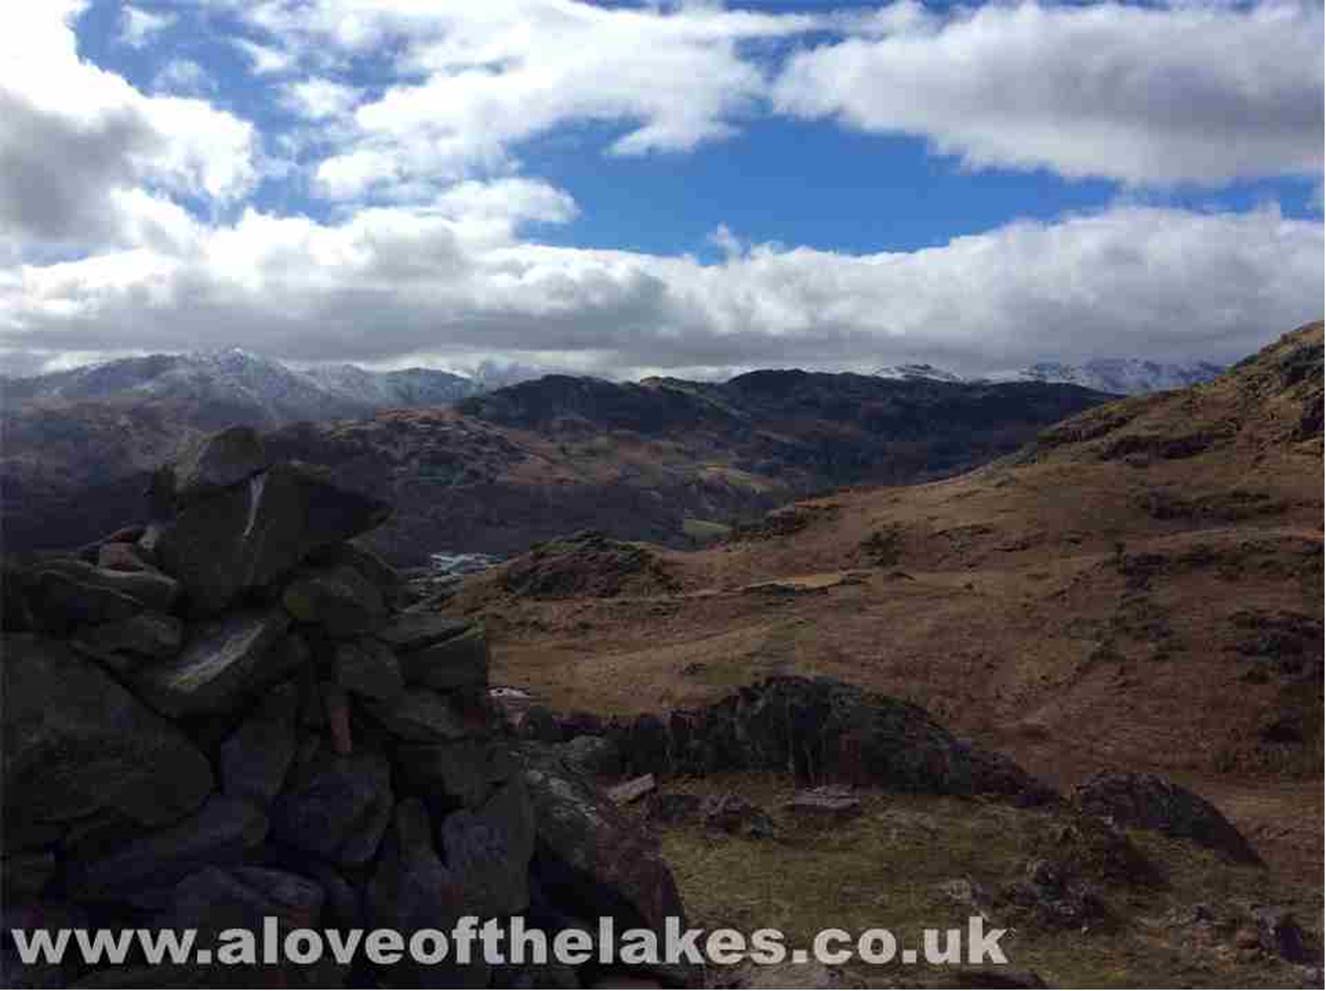 Follow the path from the gap that leads you gently to ascend Huntingstile Crag. The view from the small cairn here across to the Coniston
range of fells
